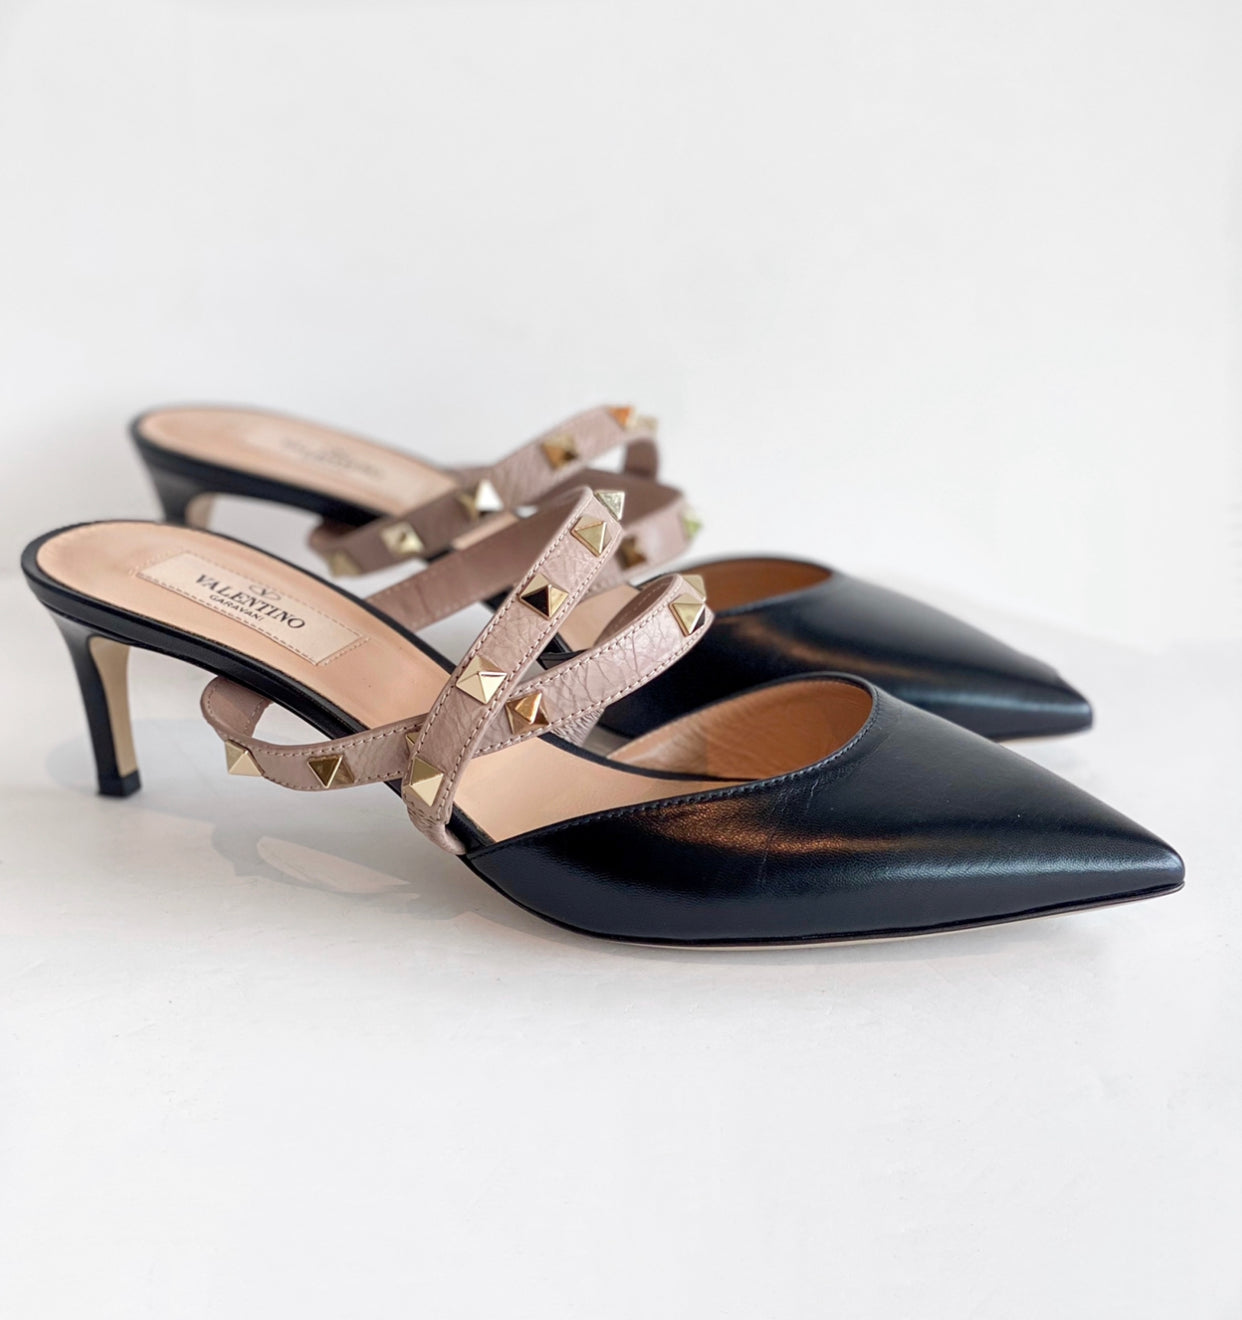 Valentino Rockstud Mules Black Side of Shoes